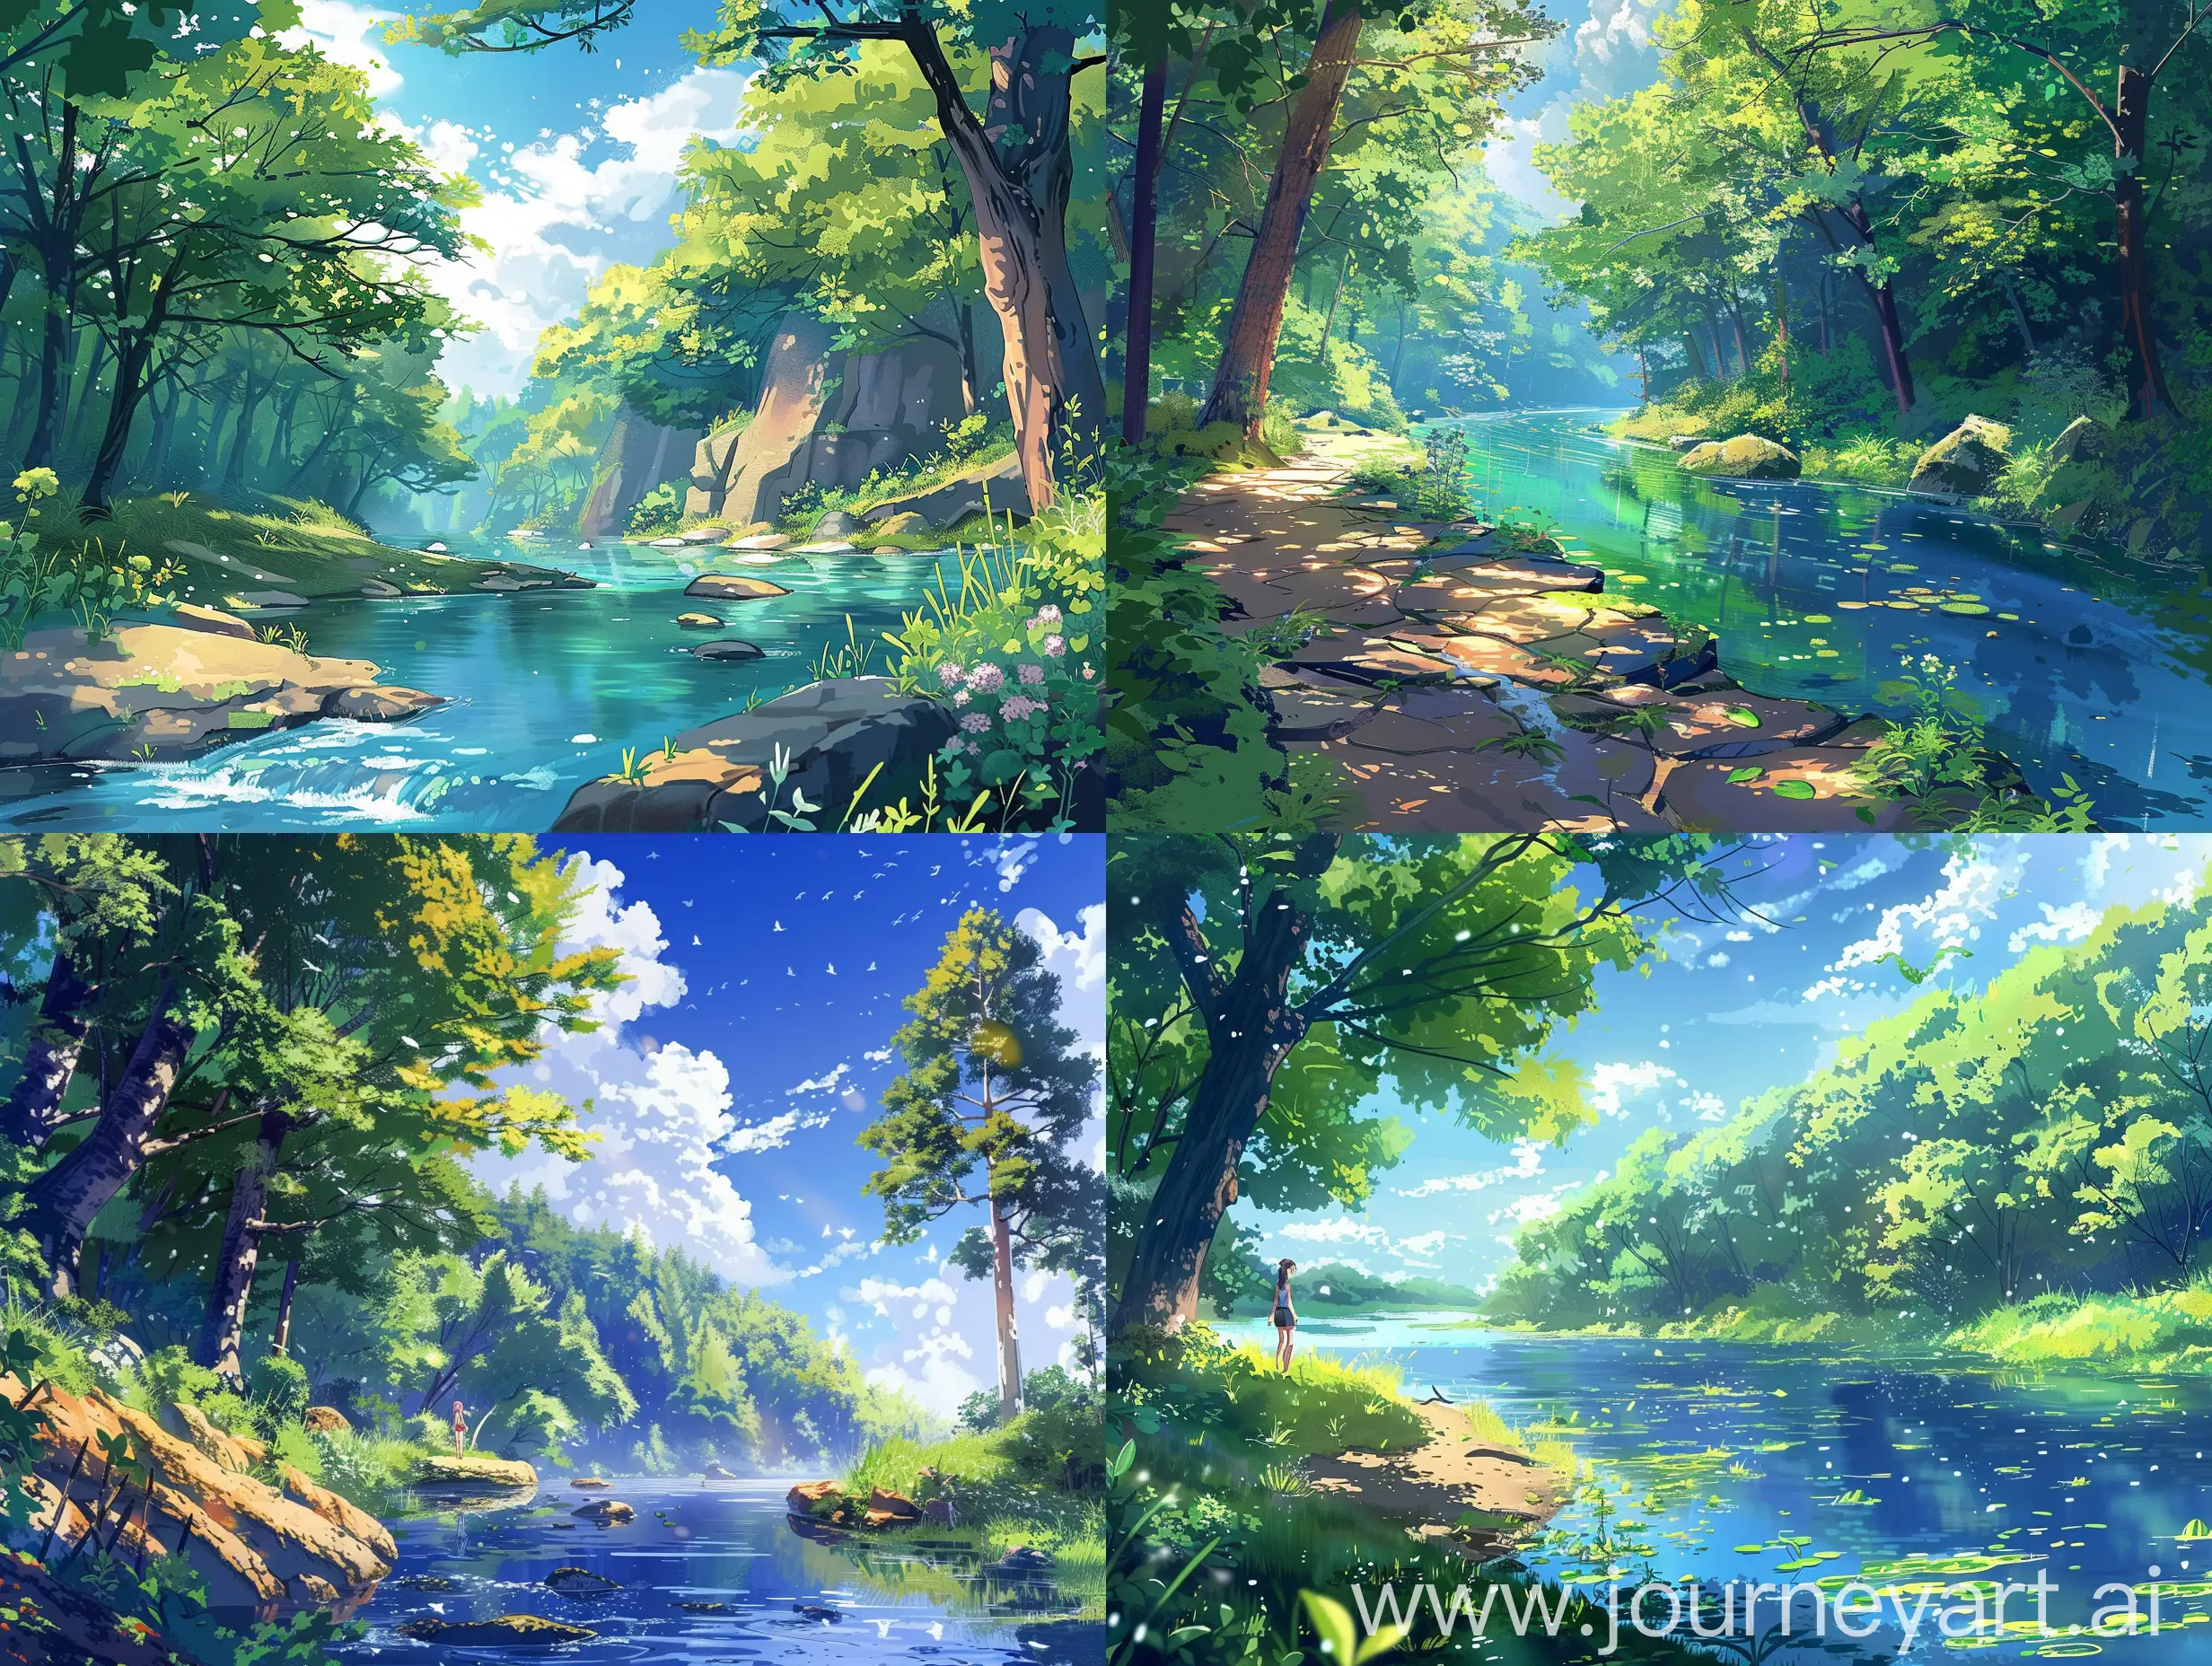 Beautiful anime style,genshin impact style,mix of studio ghibli style,in the woods,river,summers